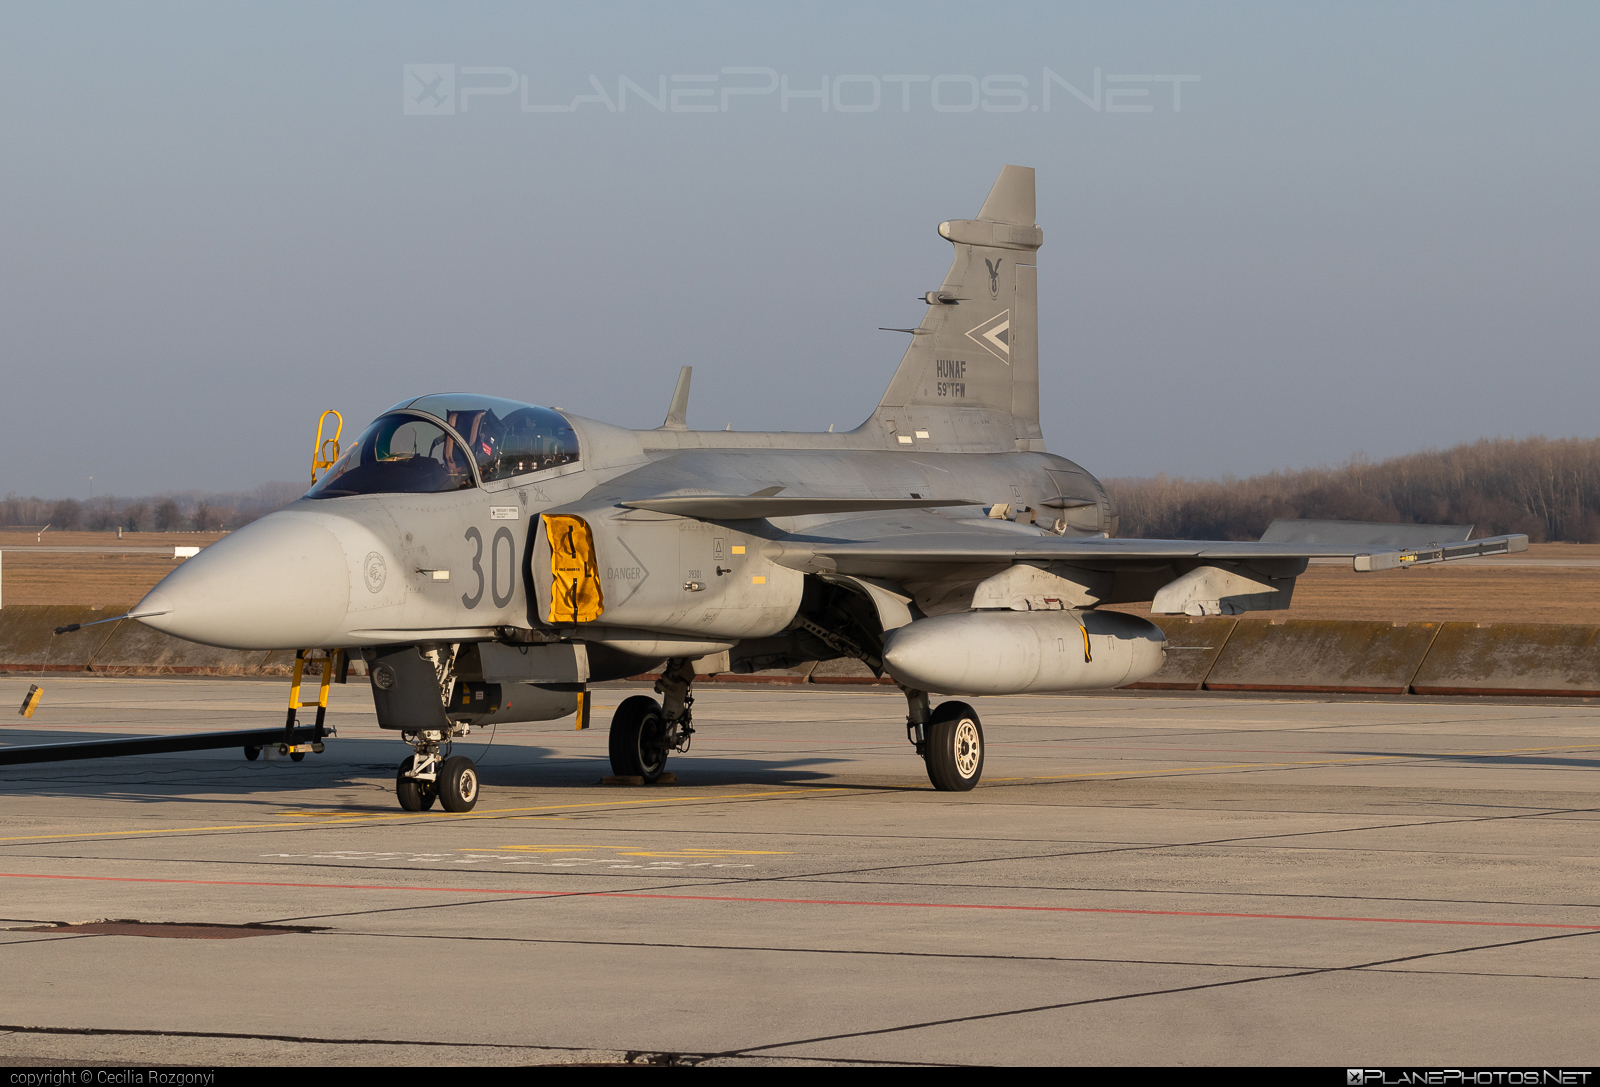 Saab JAS 39C Gripen - 30 operated by Magyar Légierő (Hungarian Air Force) #gripen #hungarianairforce #jas39 #jas39c #jas39gripen #magyarlegiero #saab